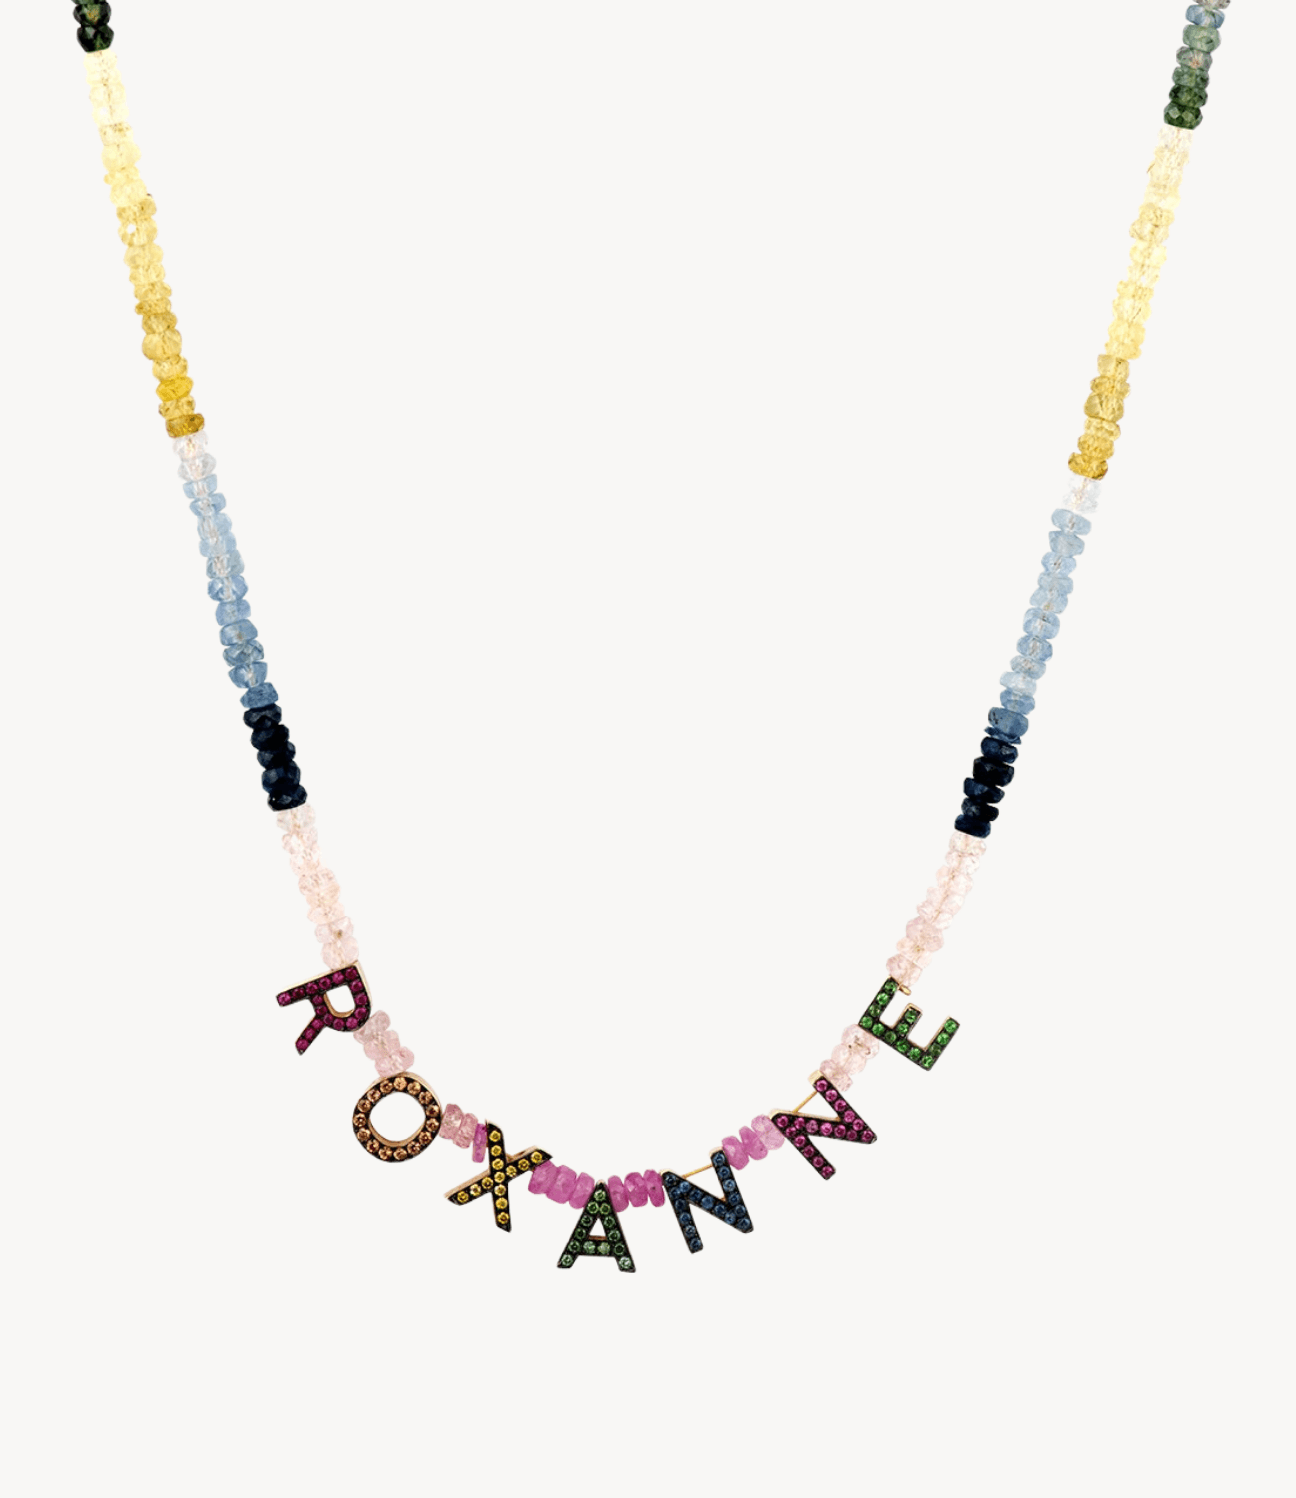 Customized Rainbow and Pearl Beaded Necklace